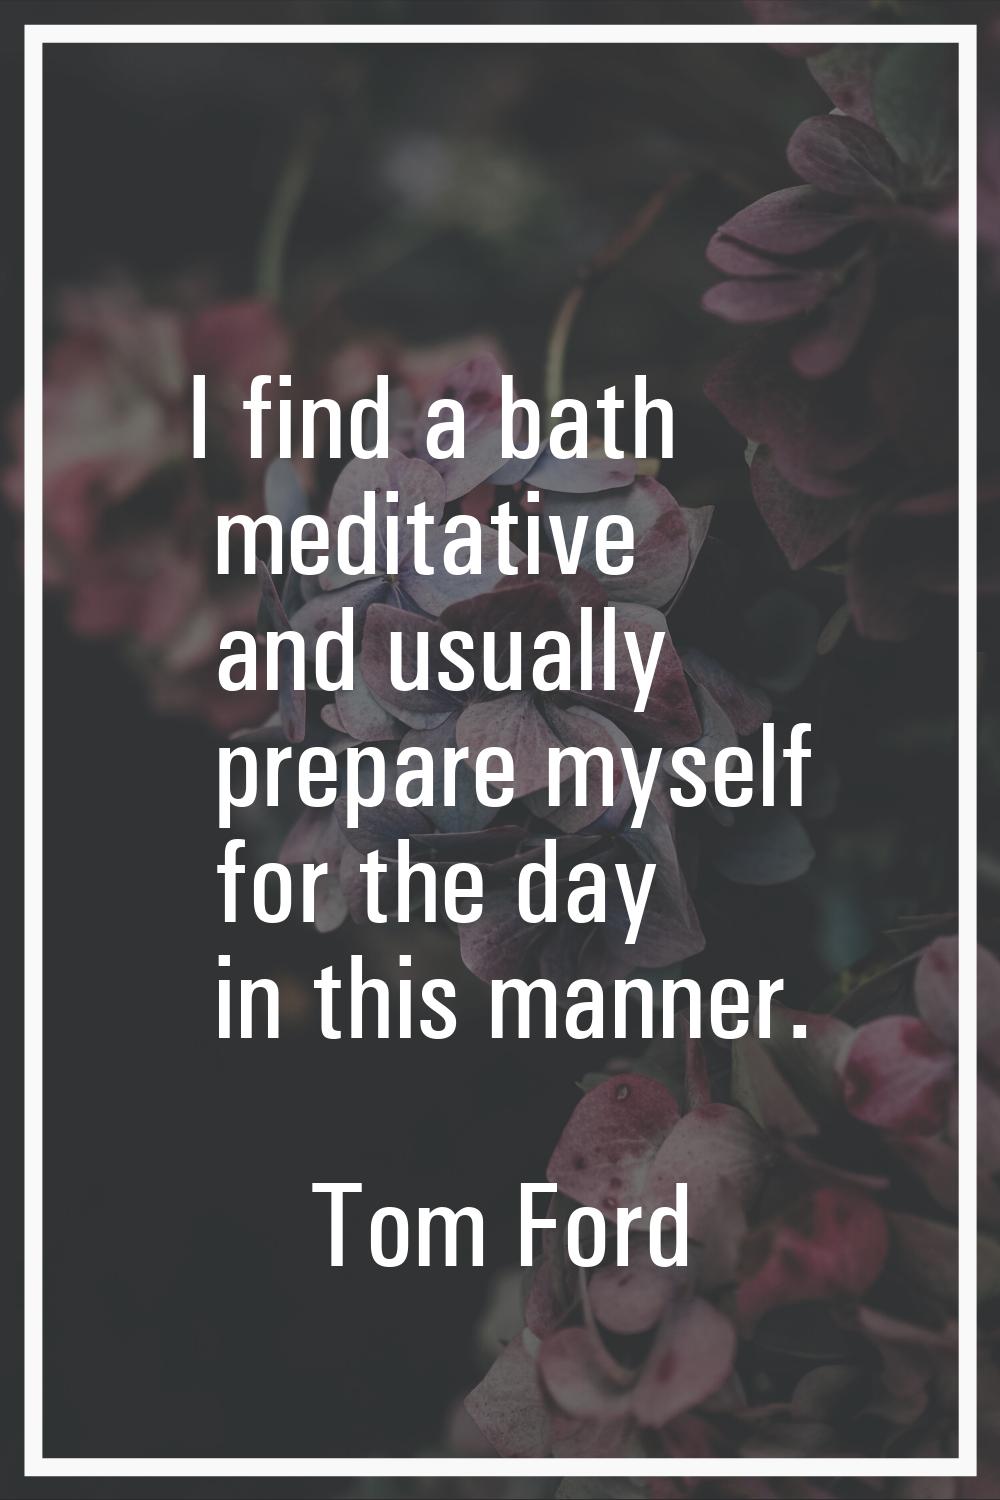 I find a bath meditative and usually prepare myself for the day in this manner.